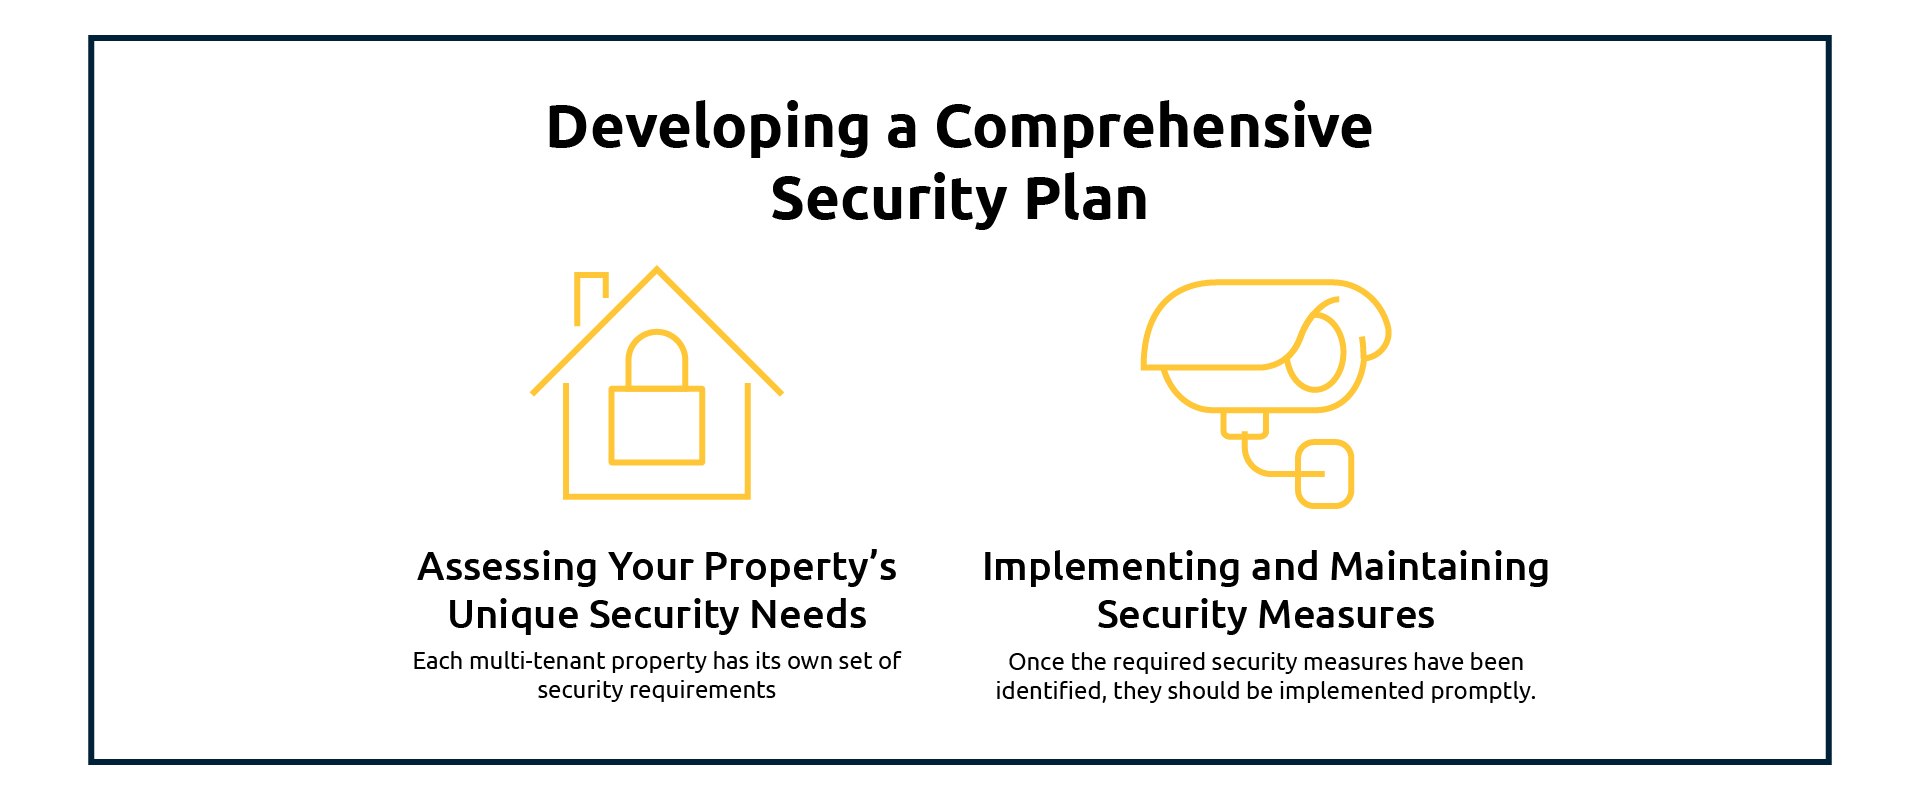 Developing a Comprehensive Security Plan